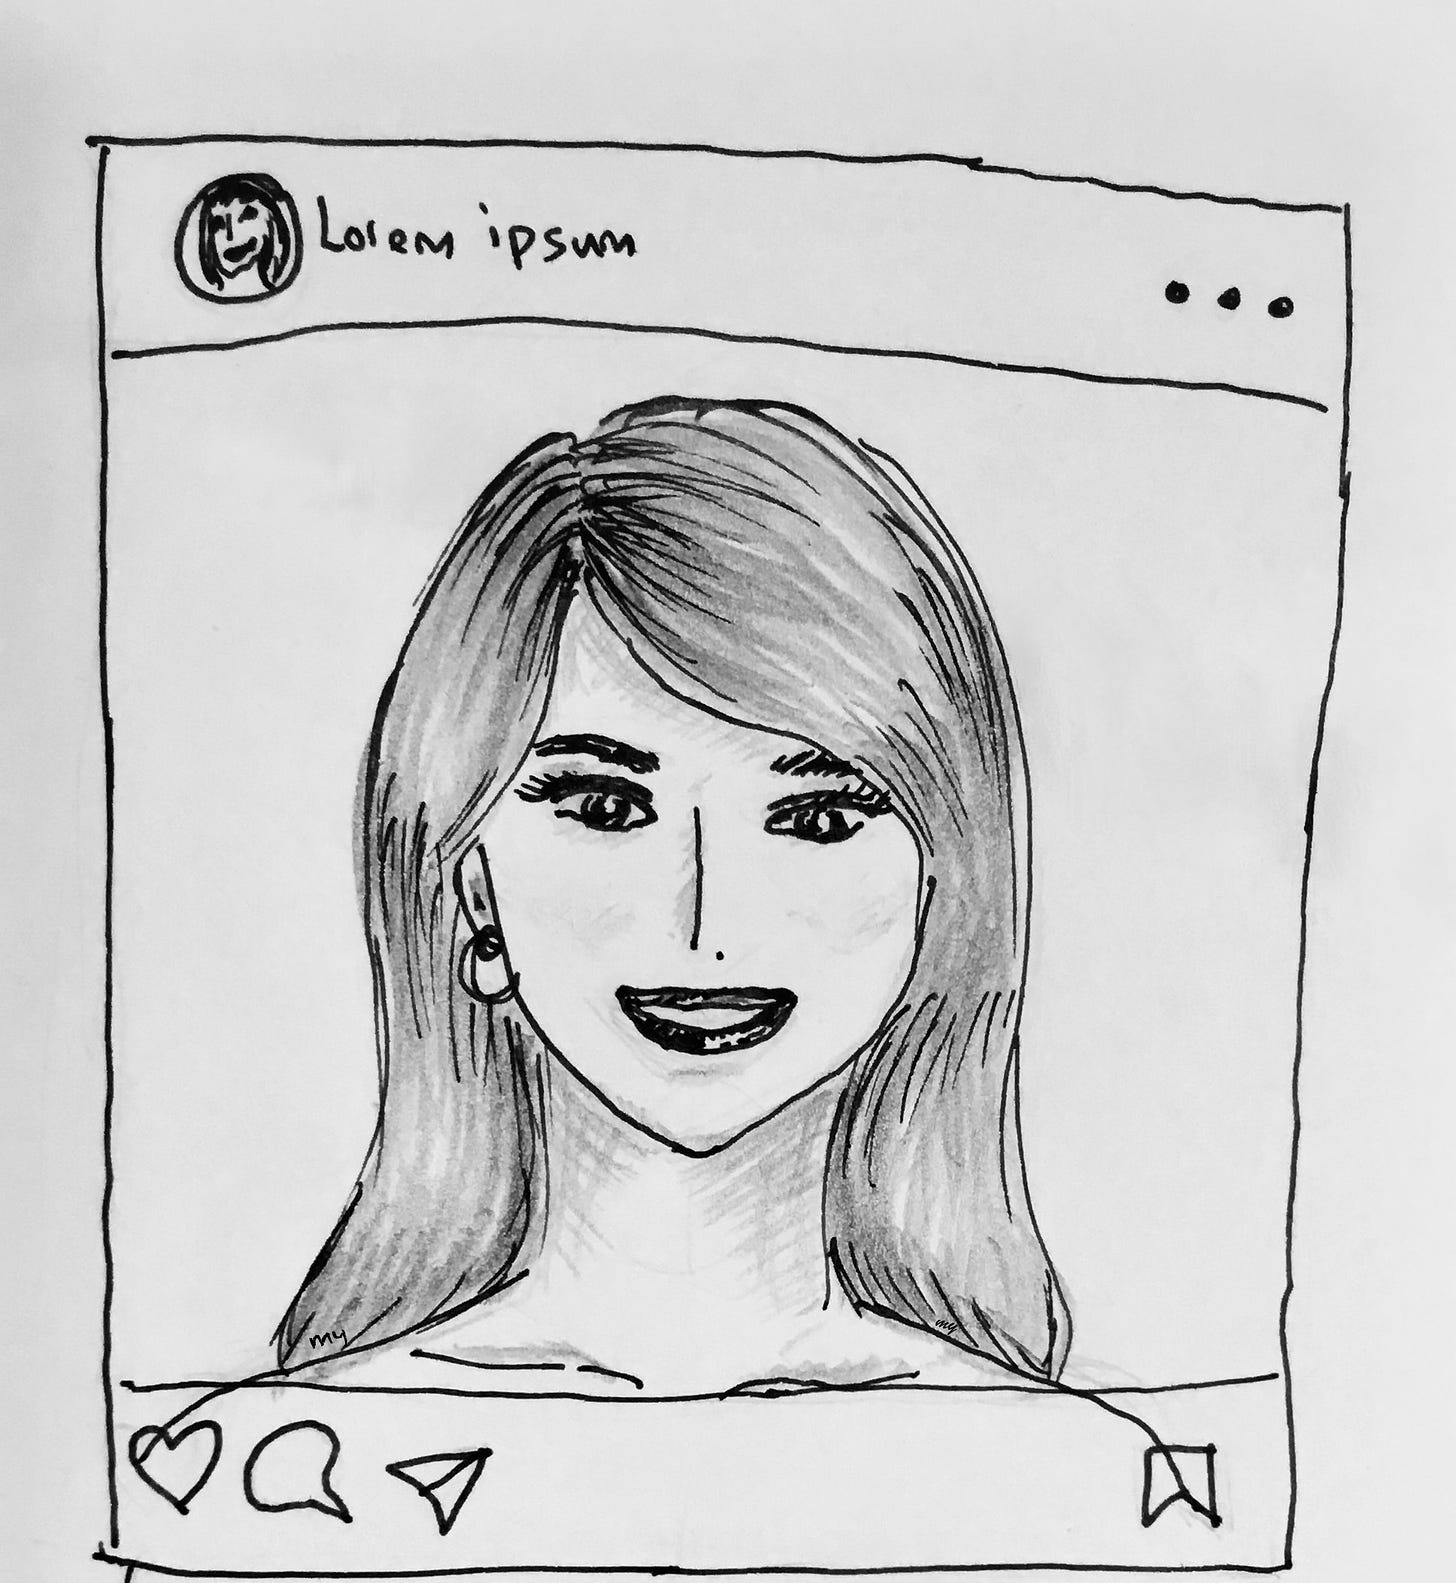 ink and pencil drawing of a woman's photo on social media